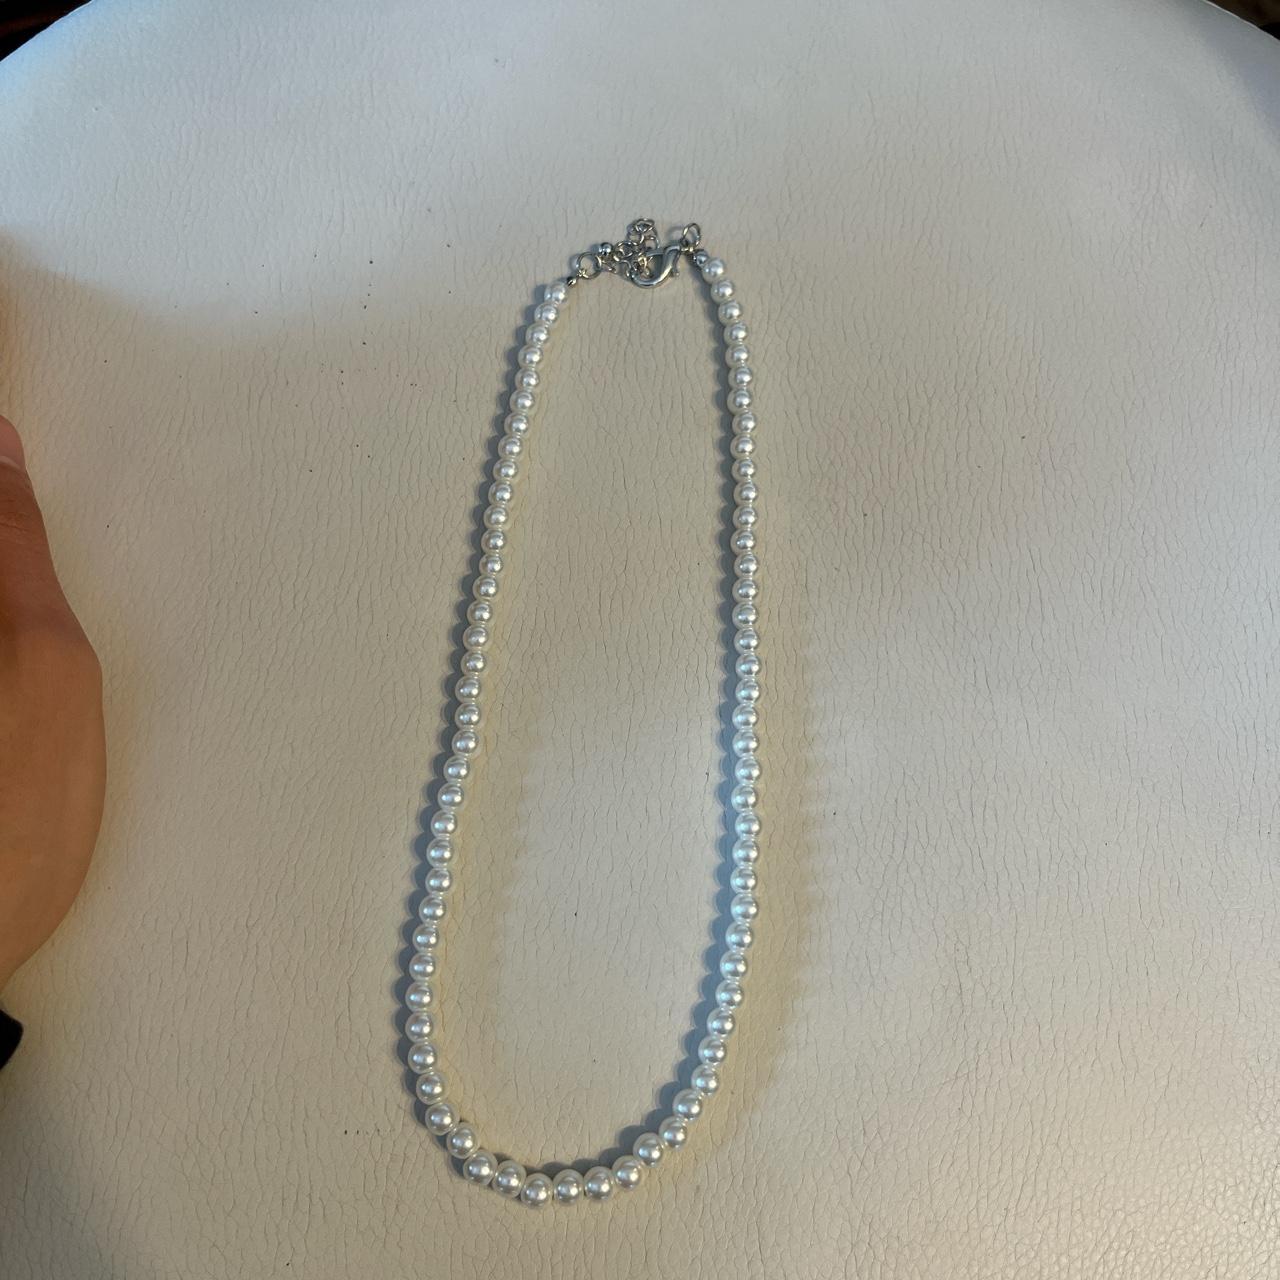 Super cute pearl necklace os brand new never worn - Depop